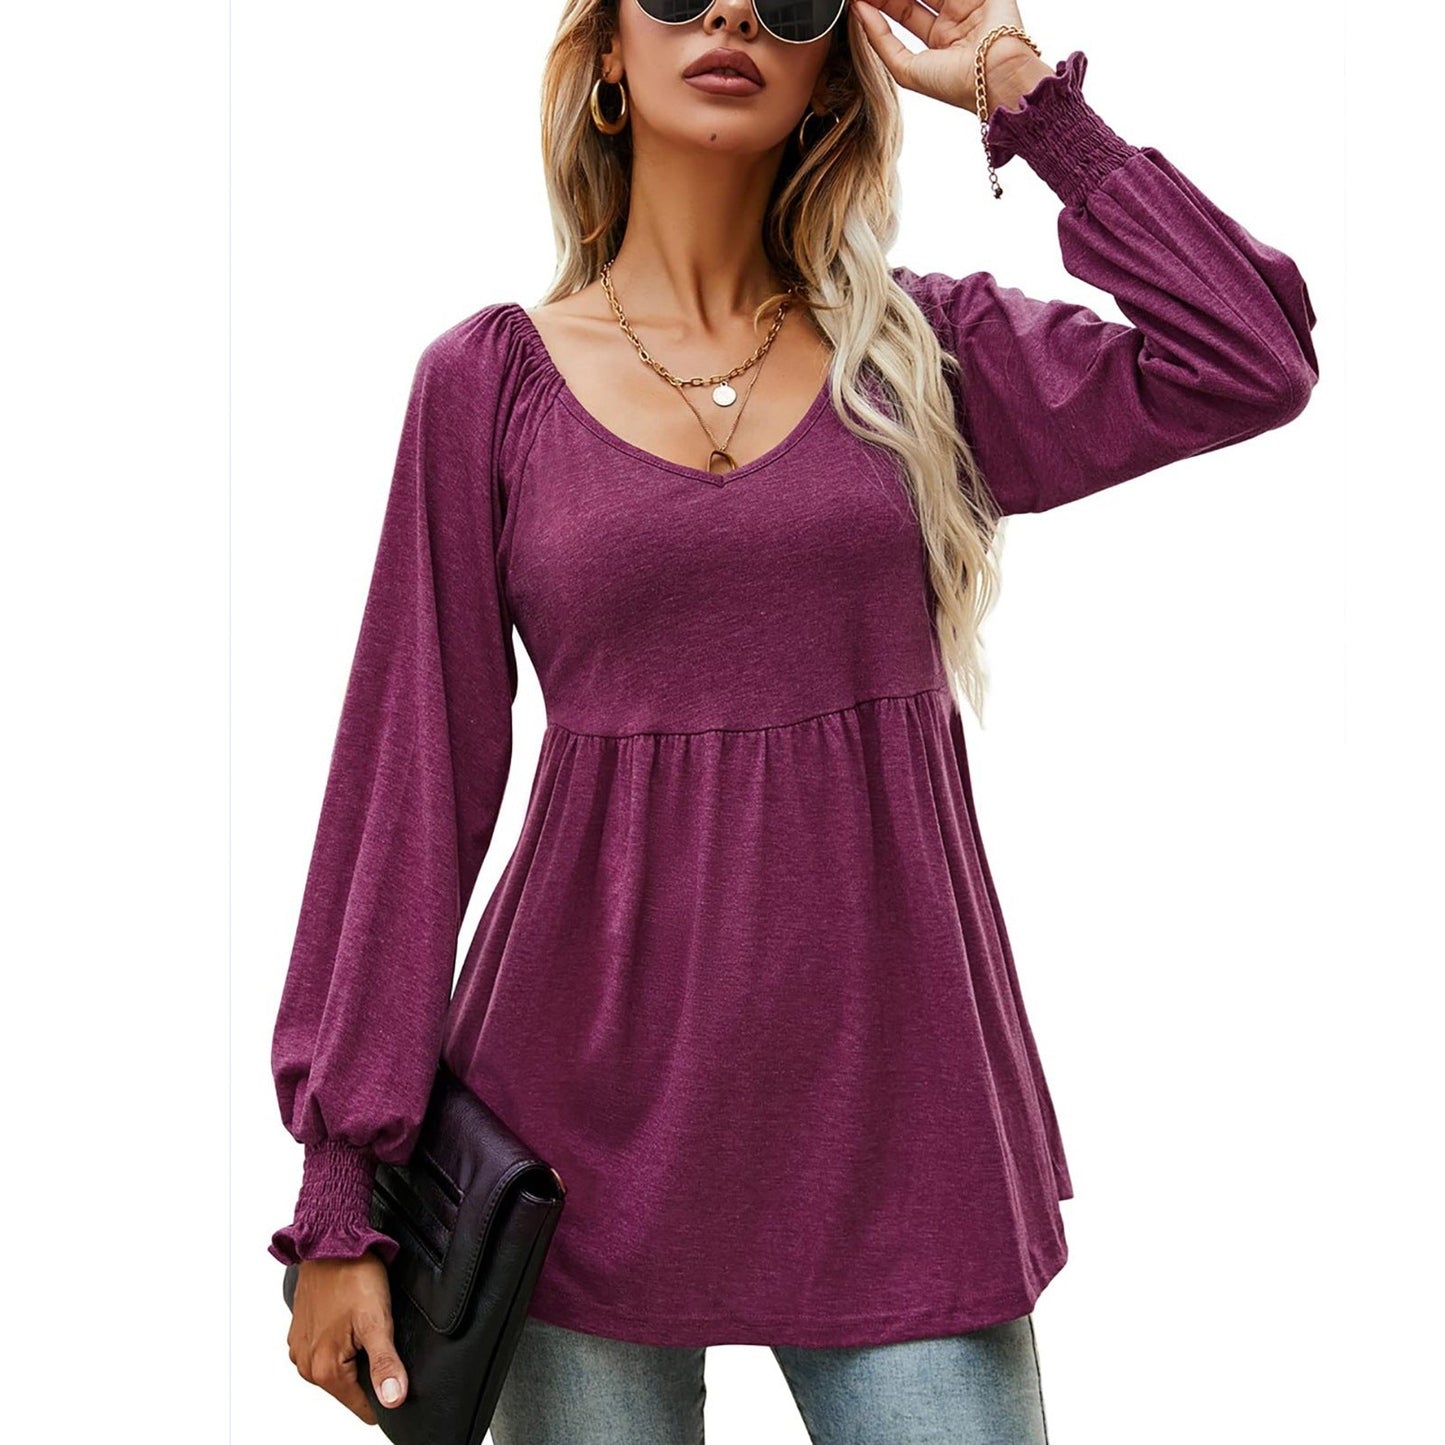 Casual Fall Long Sleeves T Shirts for Women